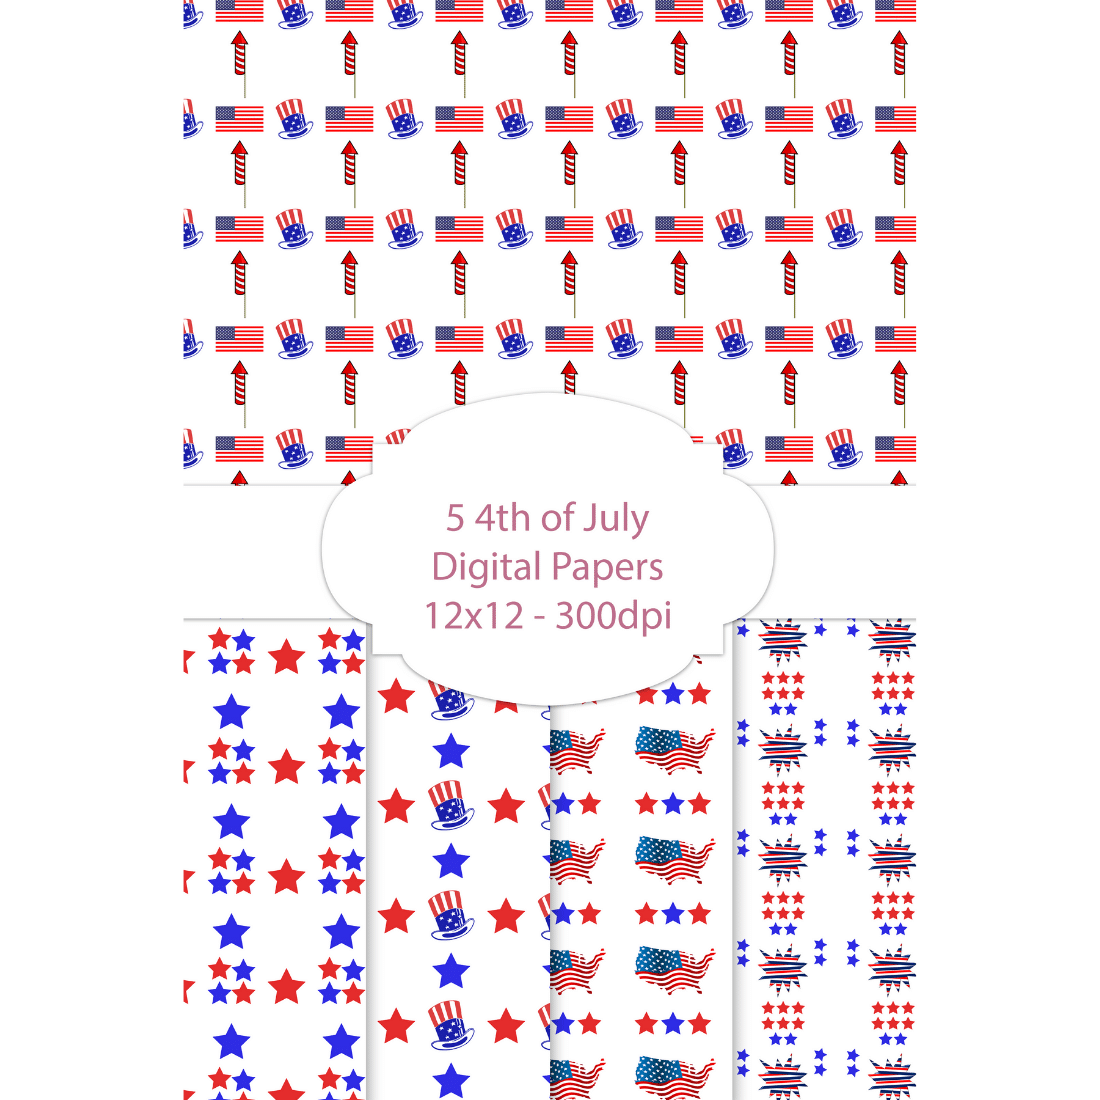 4th of July Digital Patterns cover image.